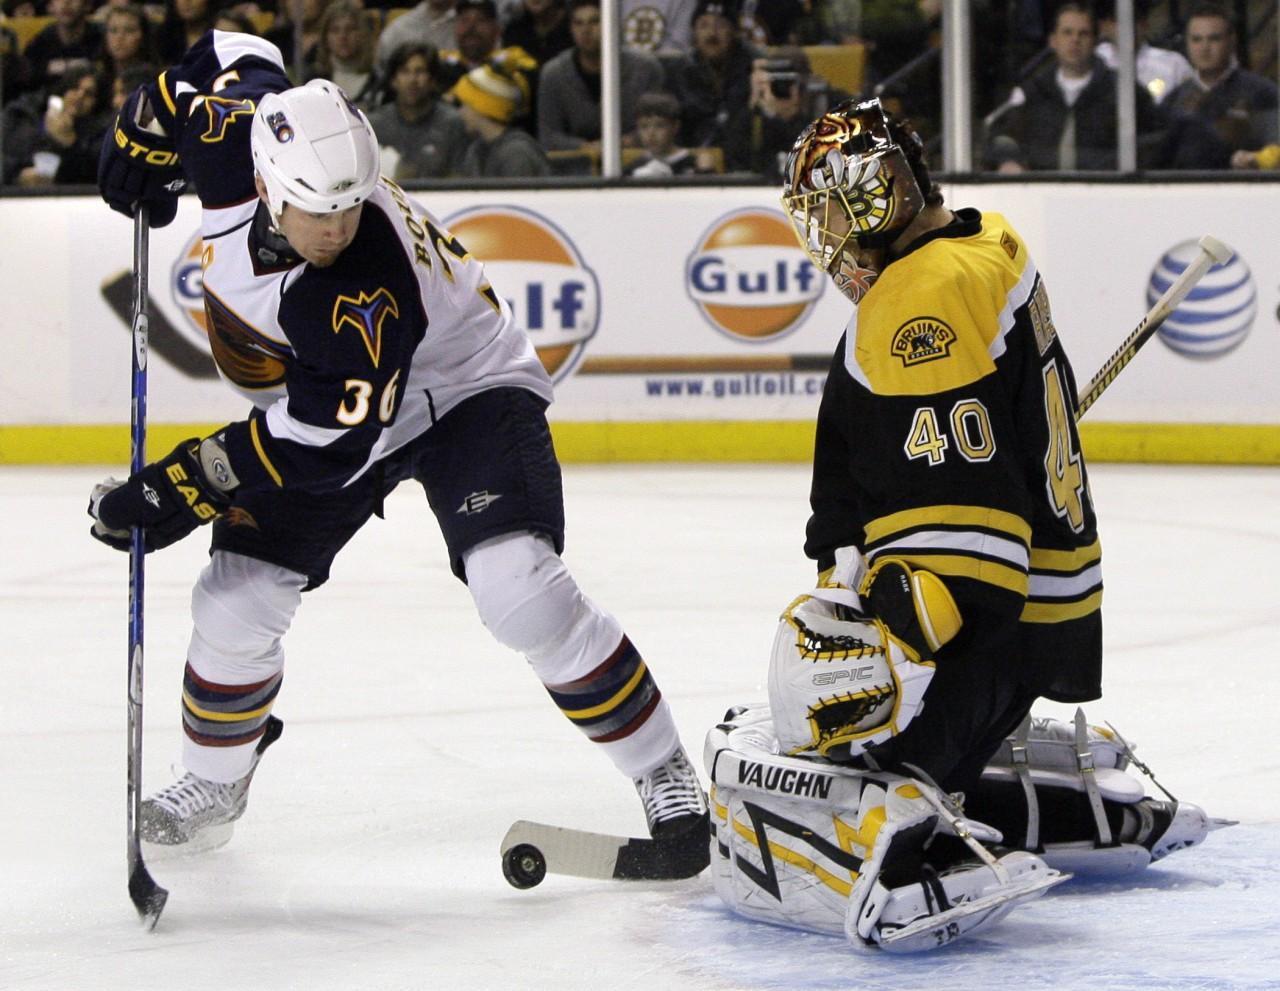 Boston Bruins goalie Tuukka Rask makes a save on an attempt by Atlanta Thrashers left wing Eric Boulton during the first period of an NHL hockey game in Boston on Wednesday. (AP)